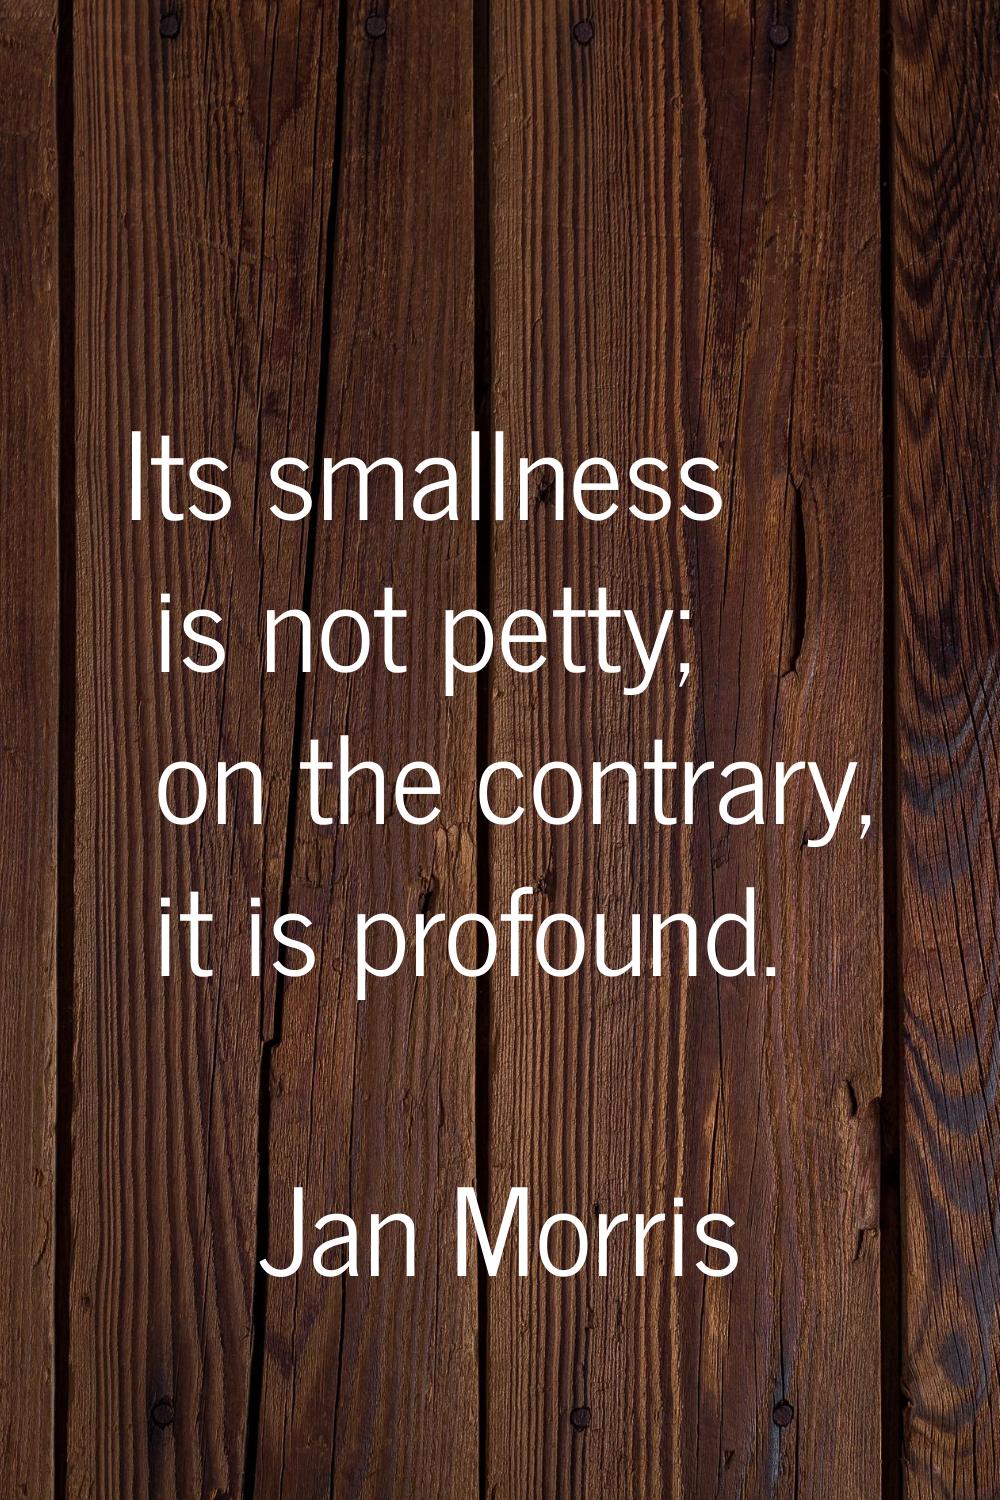 Its smallness is not petty; on the contrary, it is profound.